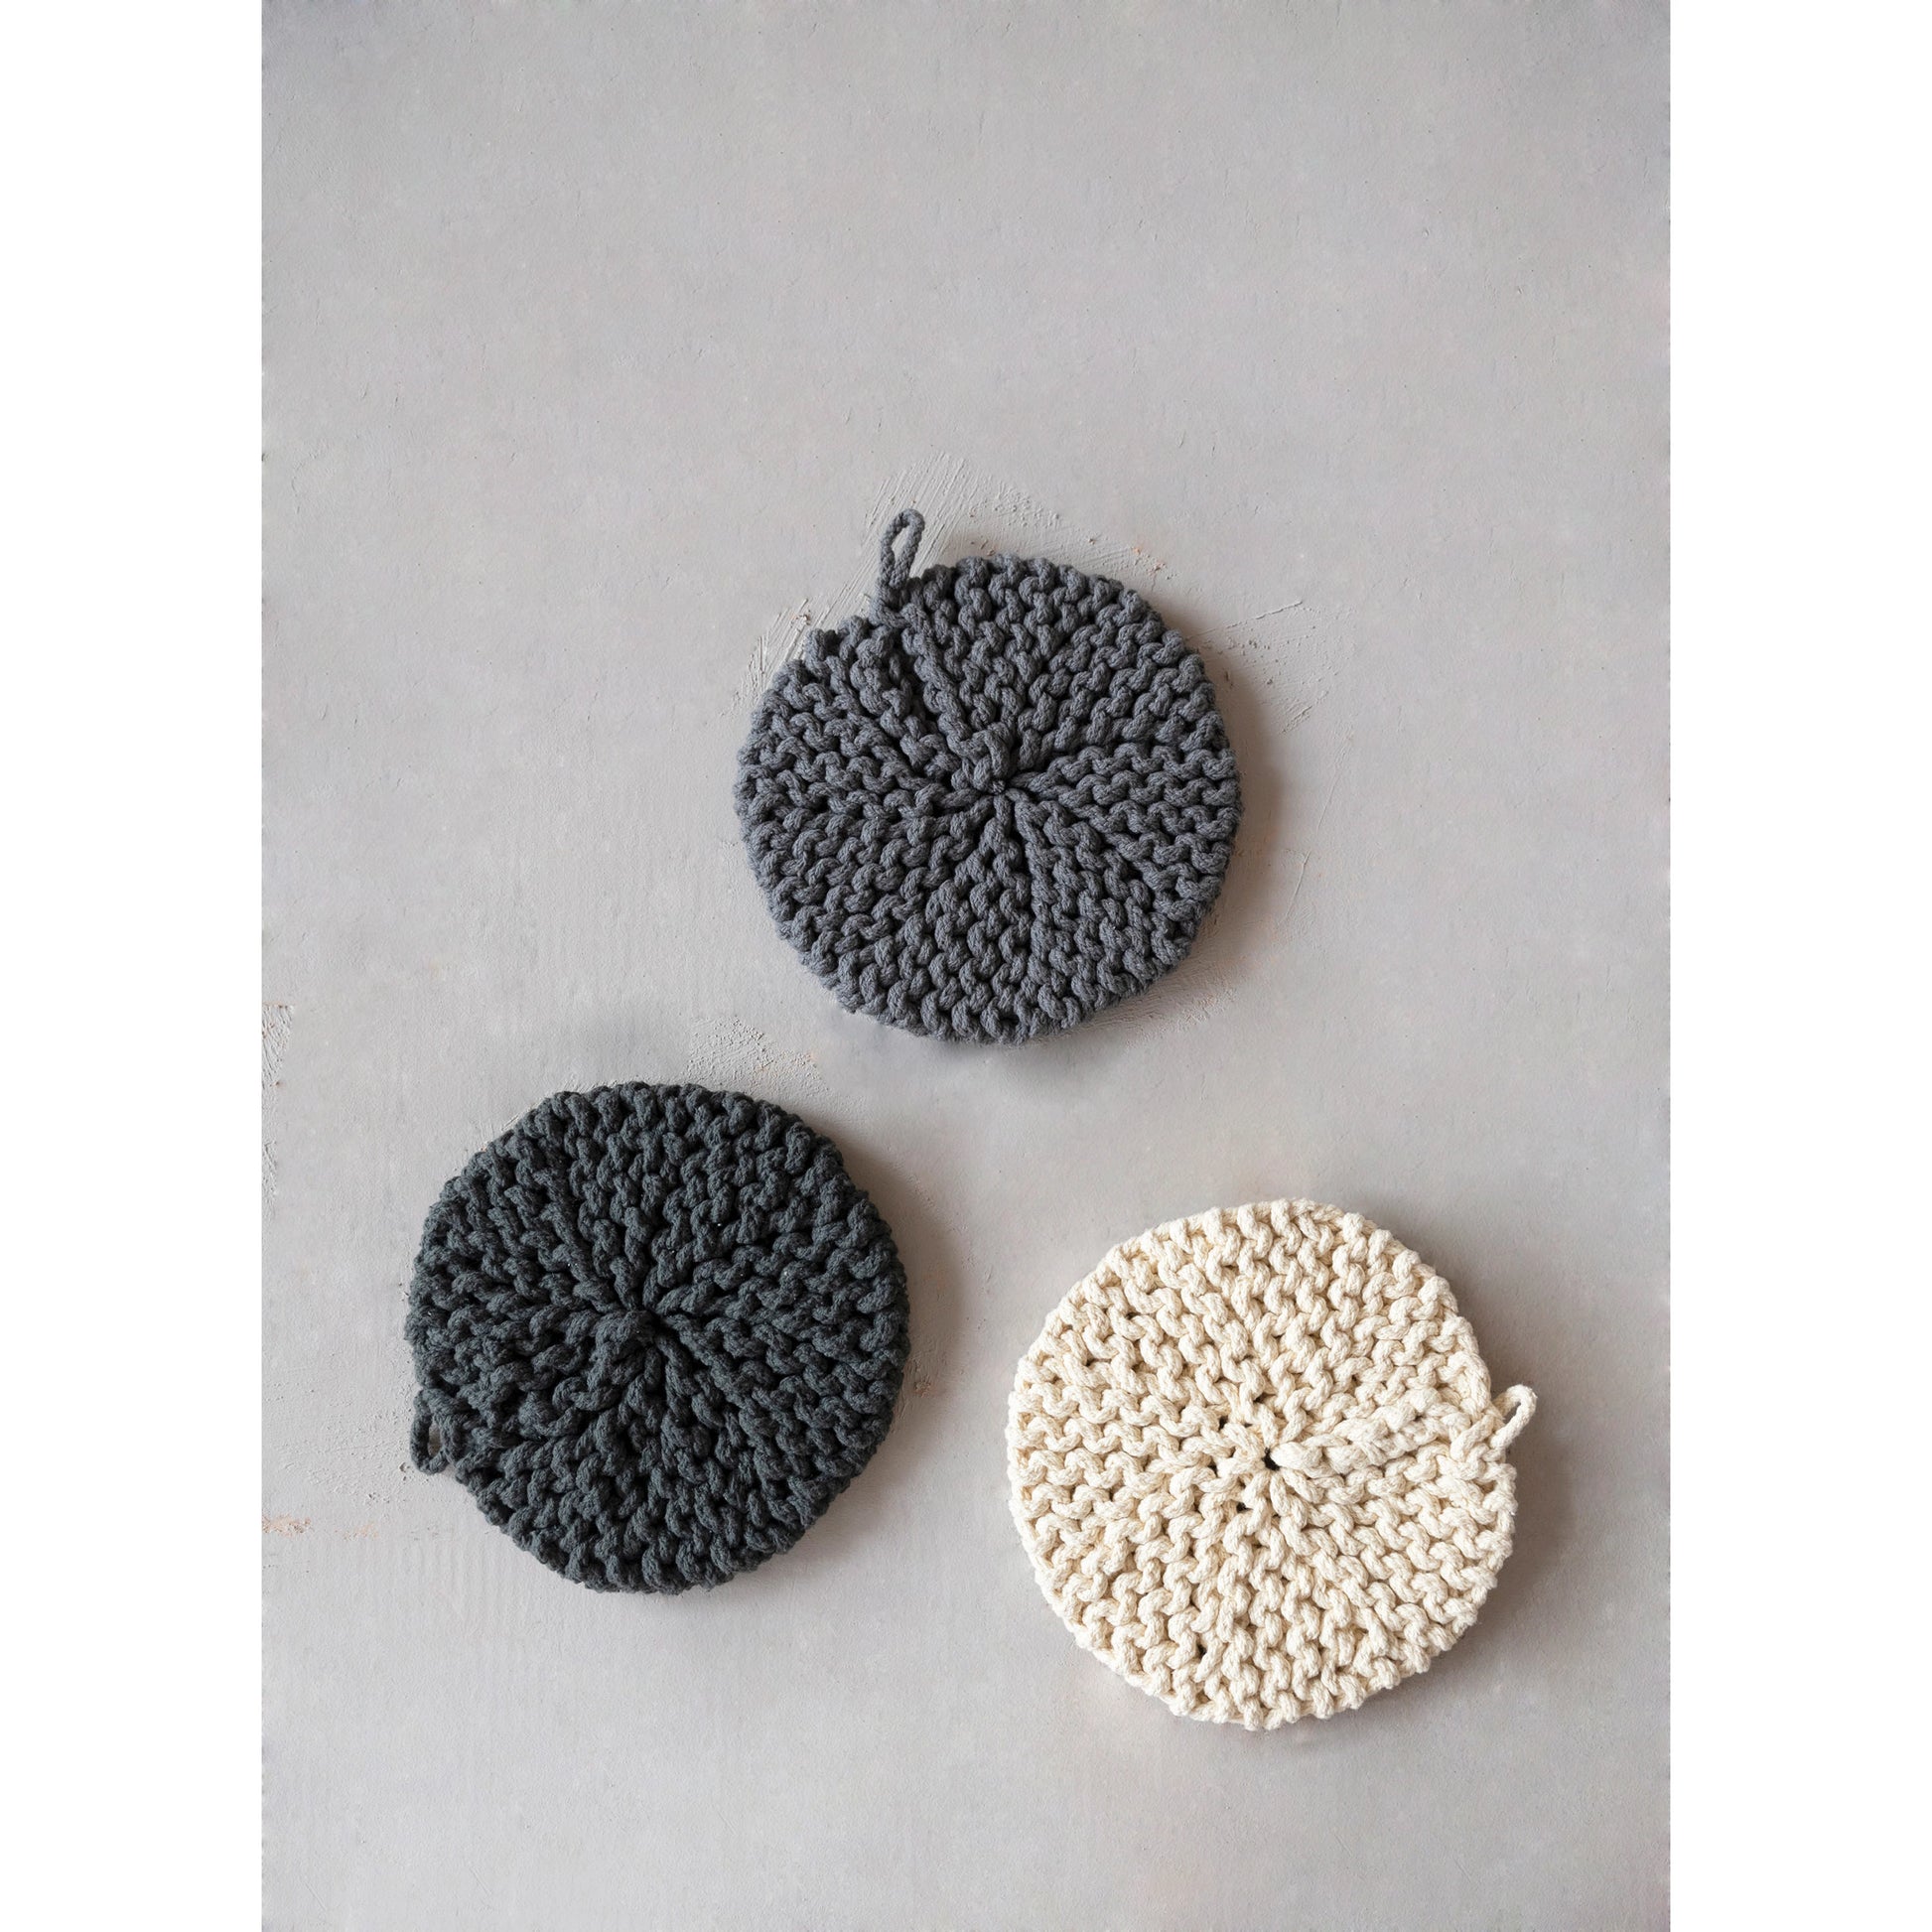  Round Crocheted Pot Holders, The Feathered Farmhouse